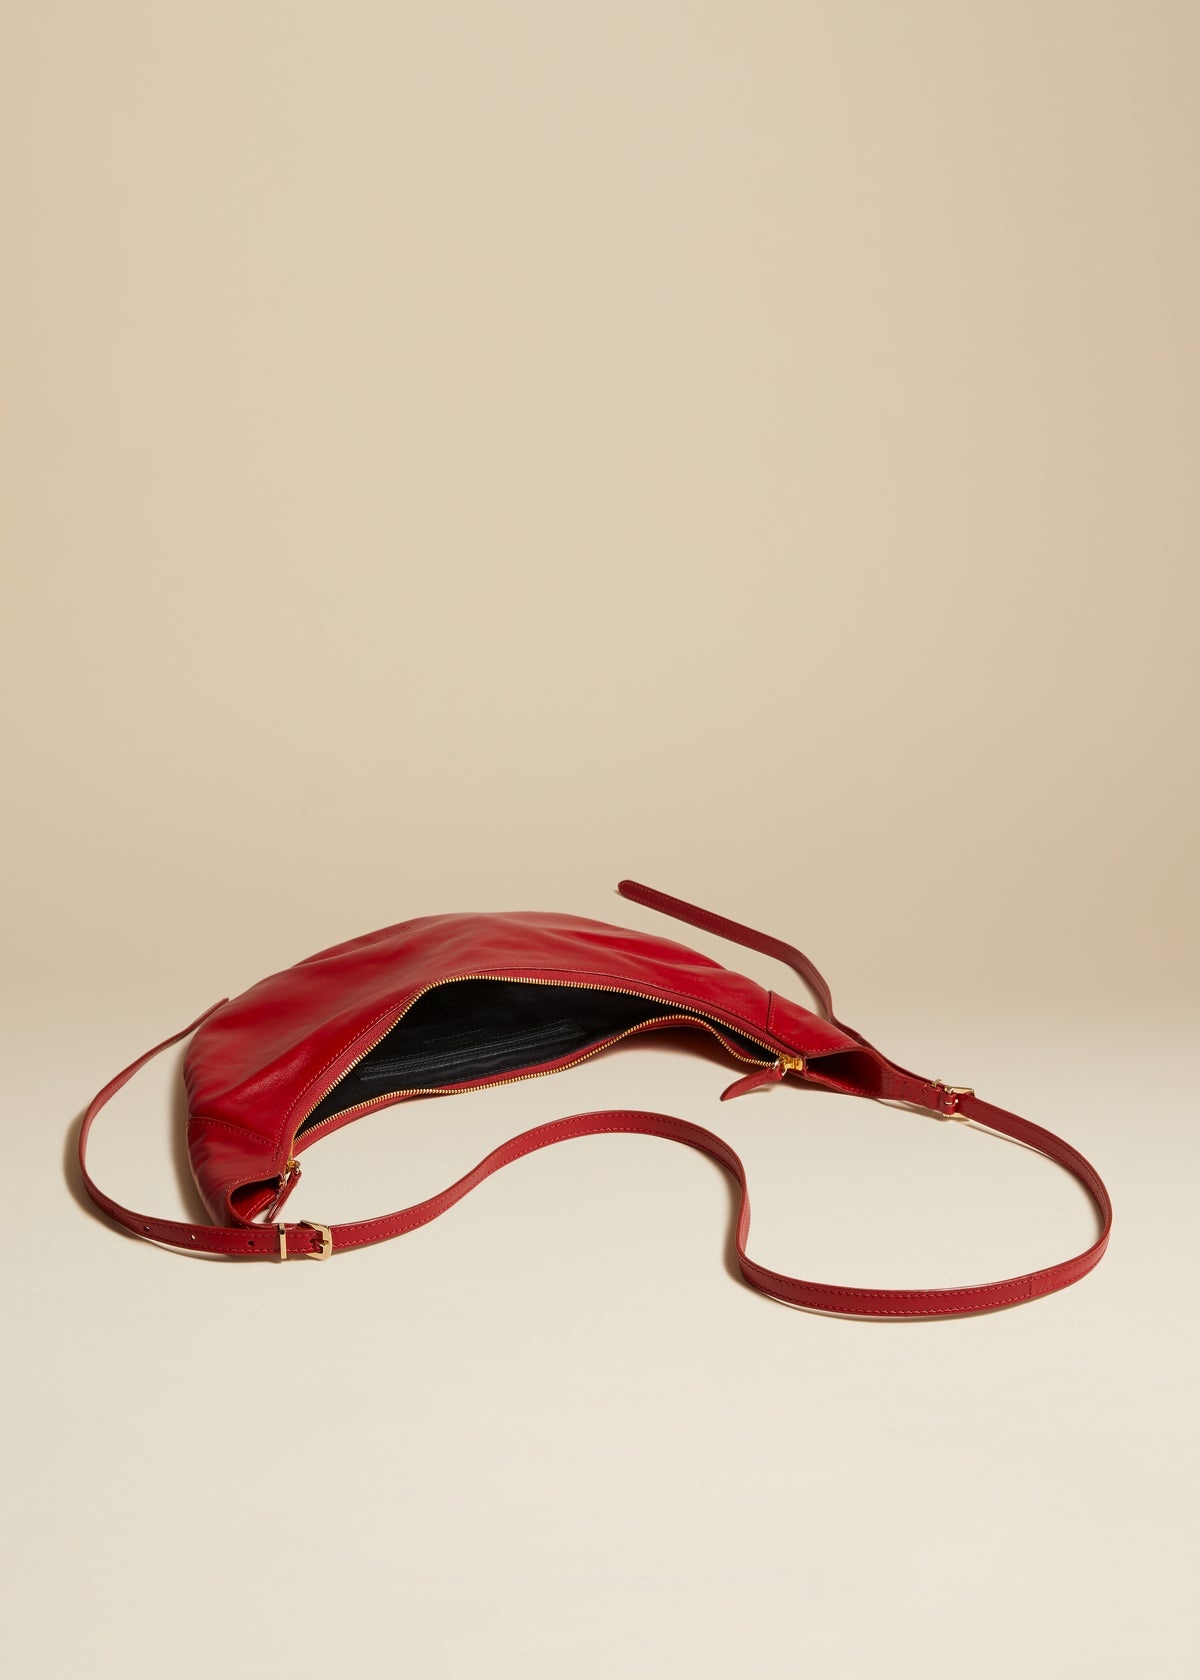 The Alessia Crossbody Bag in Fire Red Leather - 3